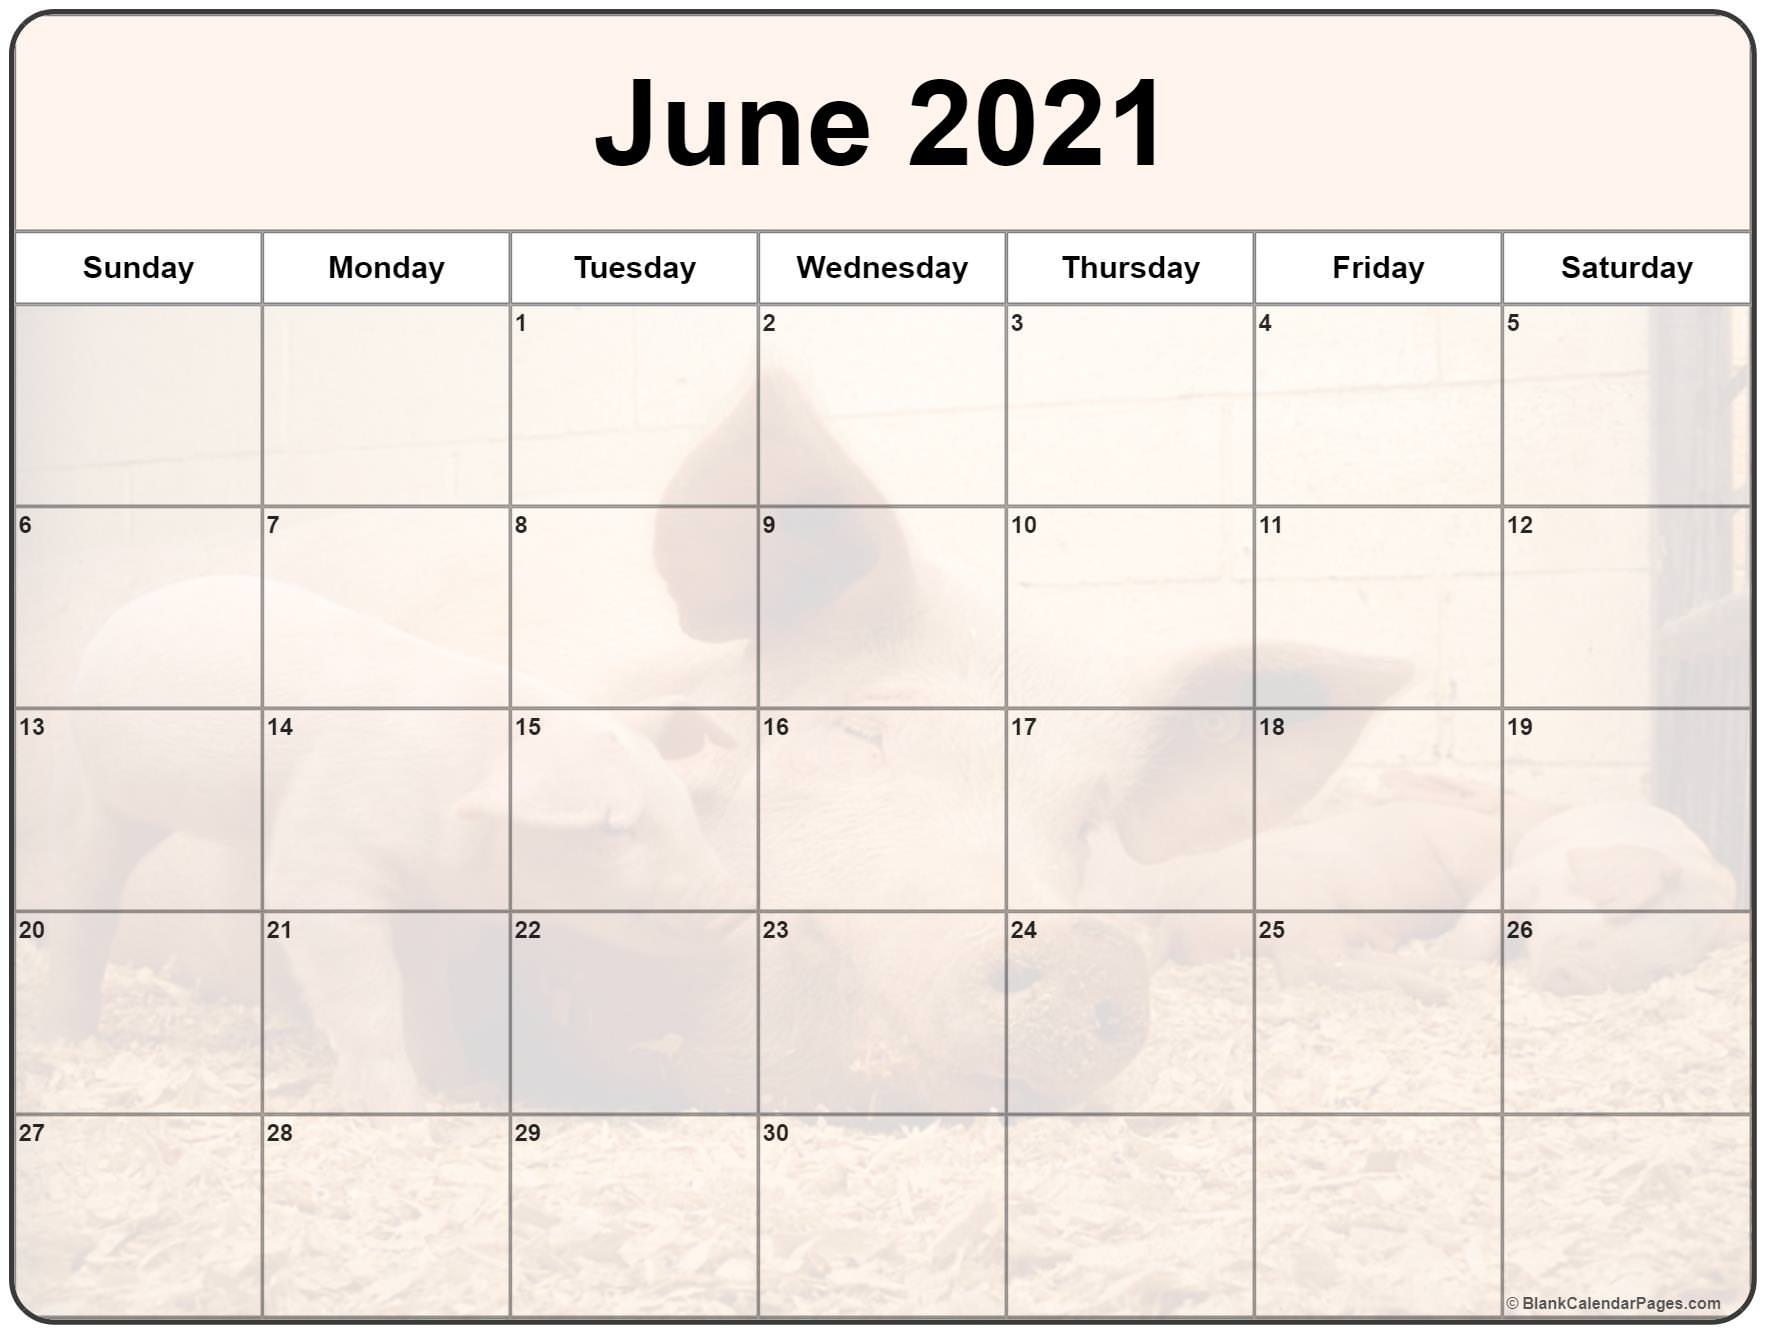 Collection Of June 2021 Photo Calendars With Image Filters.